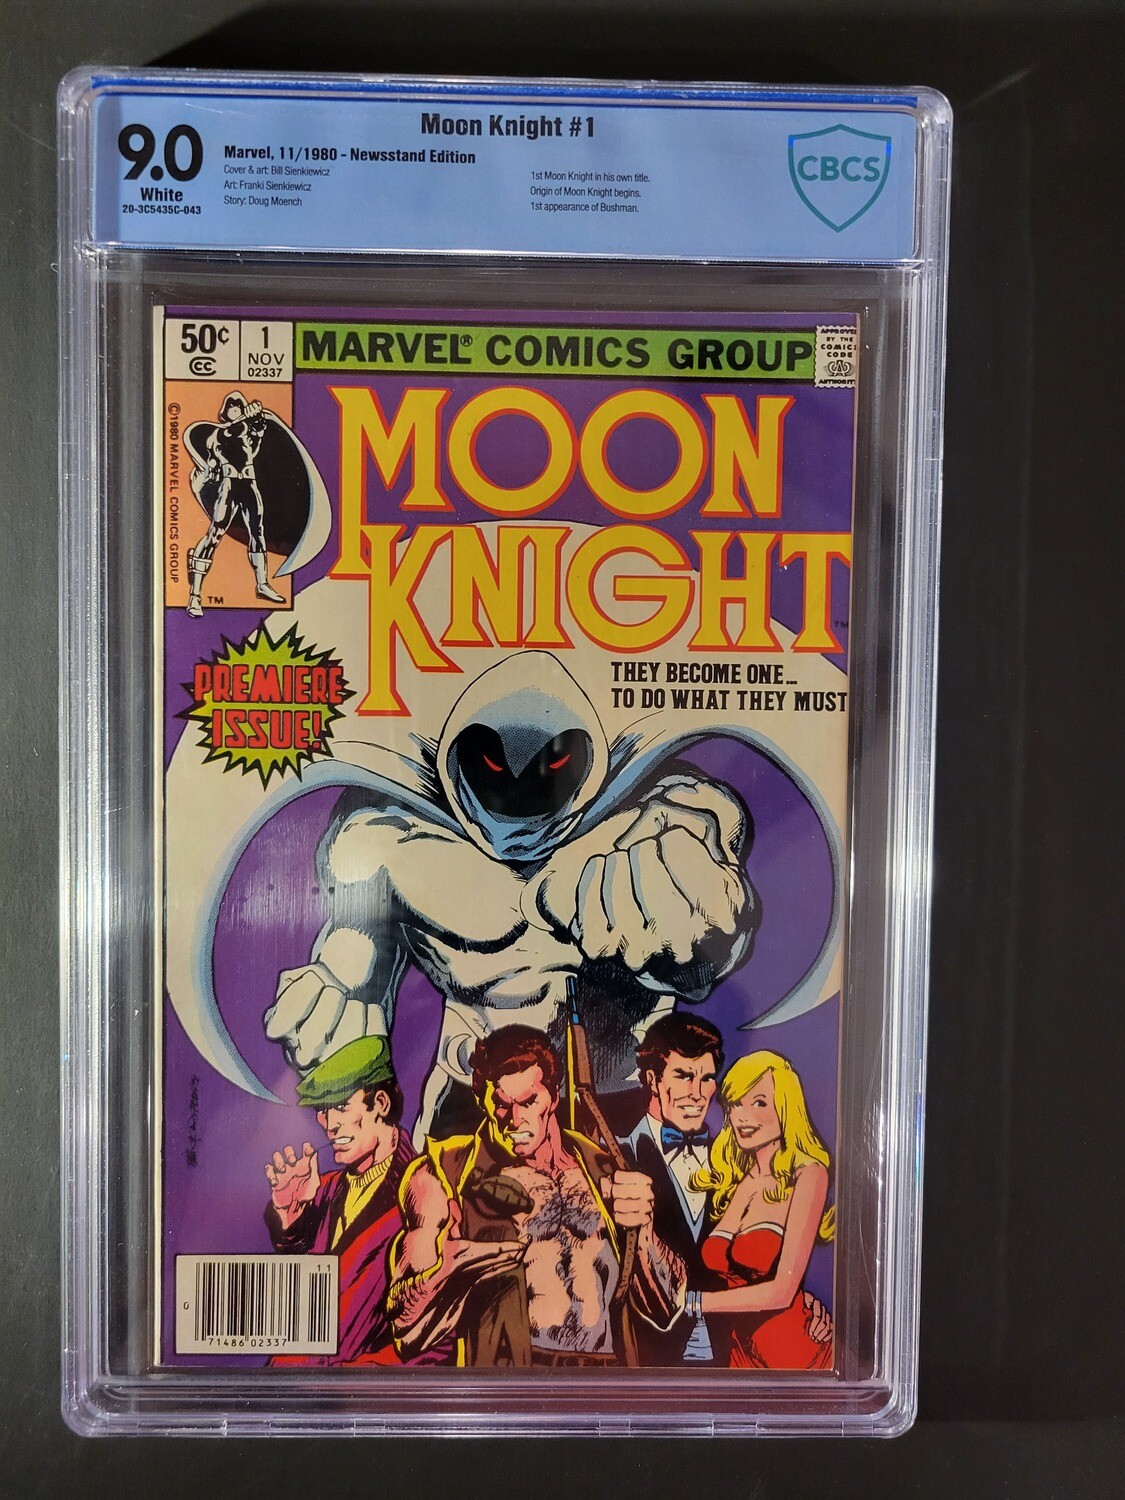 Moon Knight #1 Newsstand Edition CBCS 9.0 1st Moon Knight in his own title